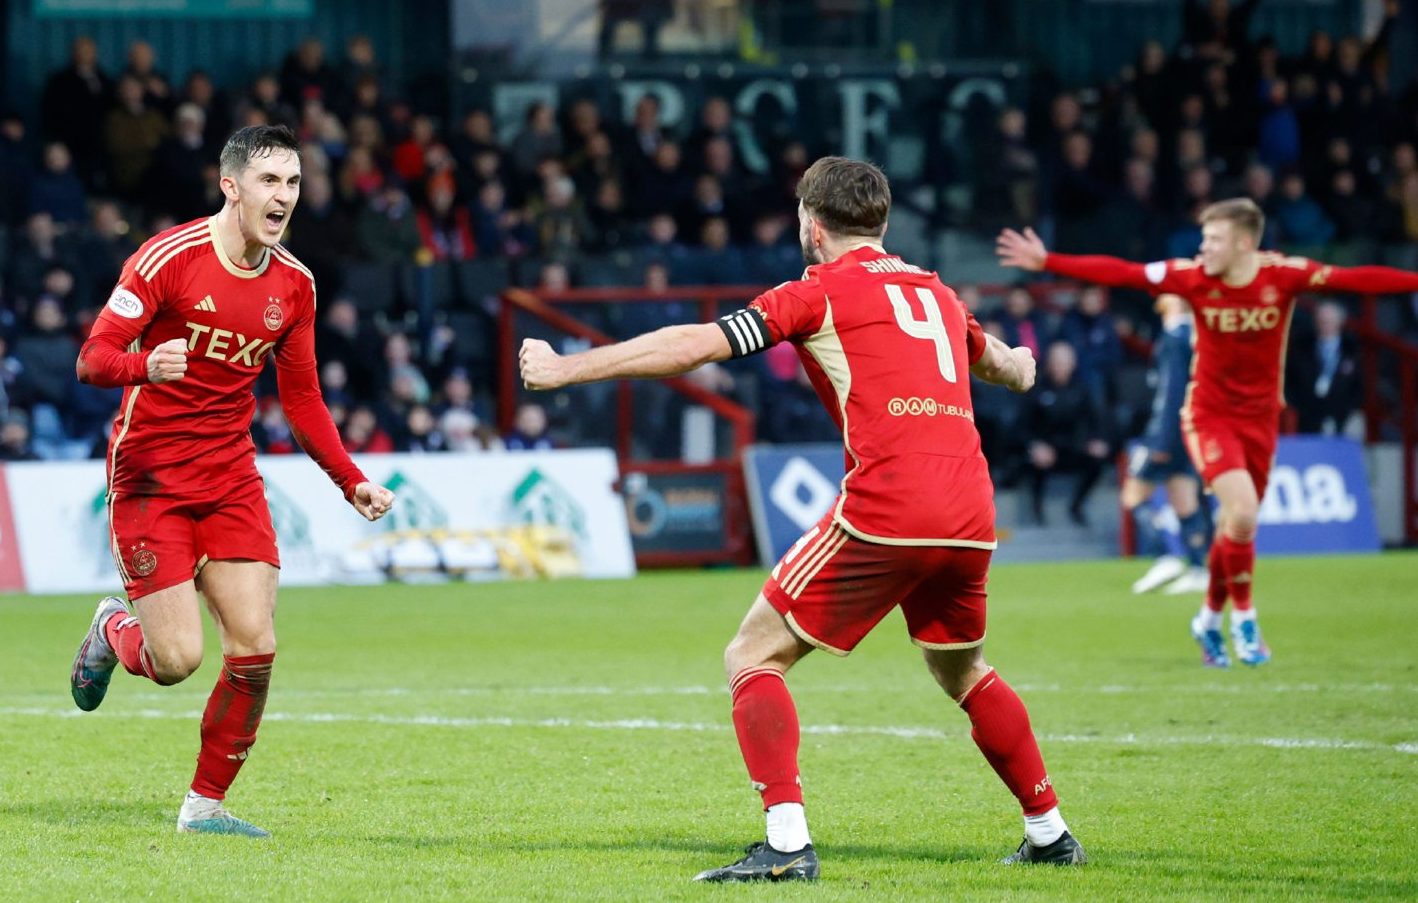 Jamie McGrath (7) of Aberdeen celebrates scoring to make it 1-0 against Ross County in Dingwall. Image: Shutterstock.